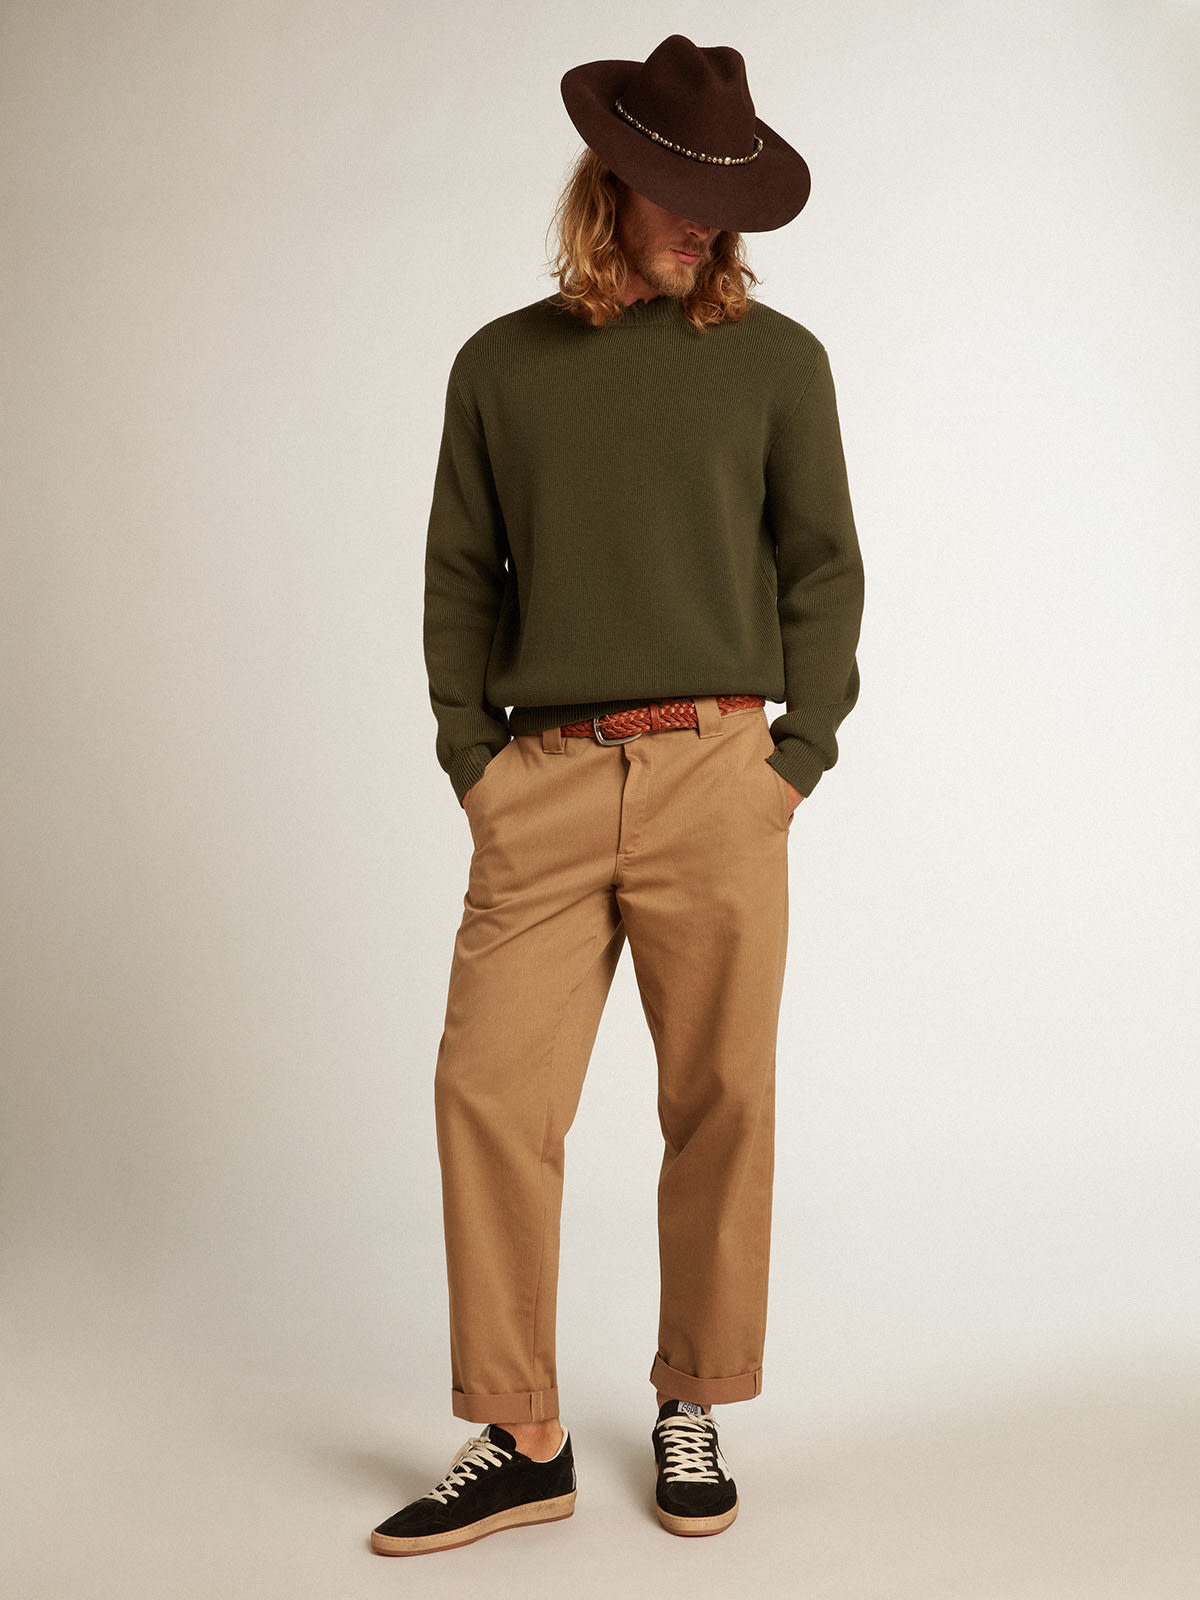 Golden Goose - Pantalone chino Golden Collection color khaki beige in 